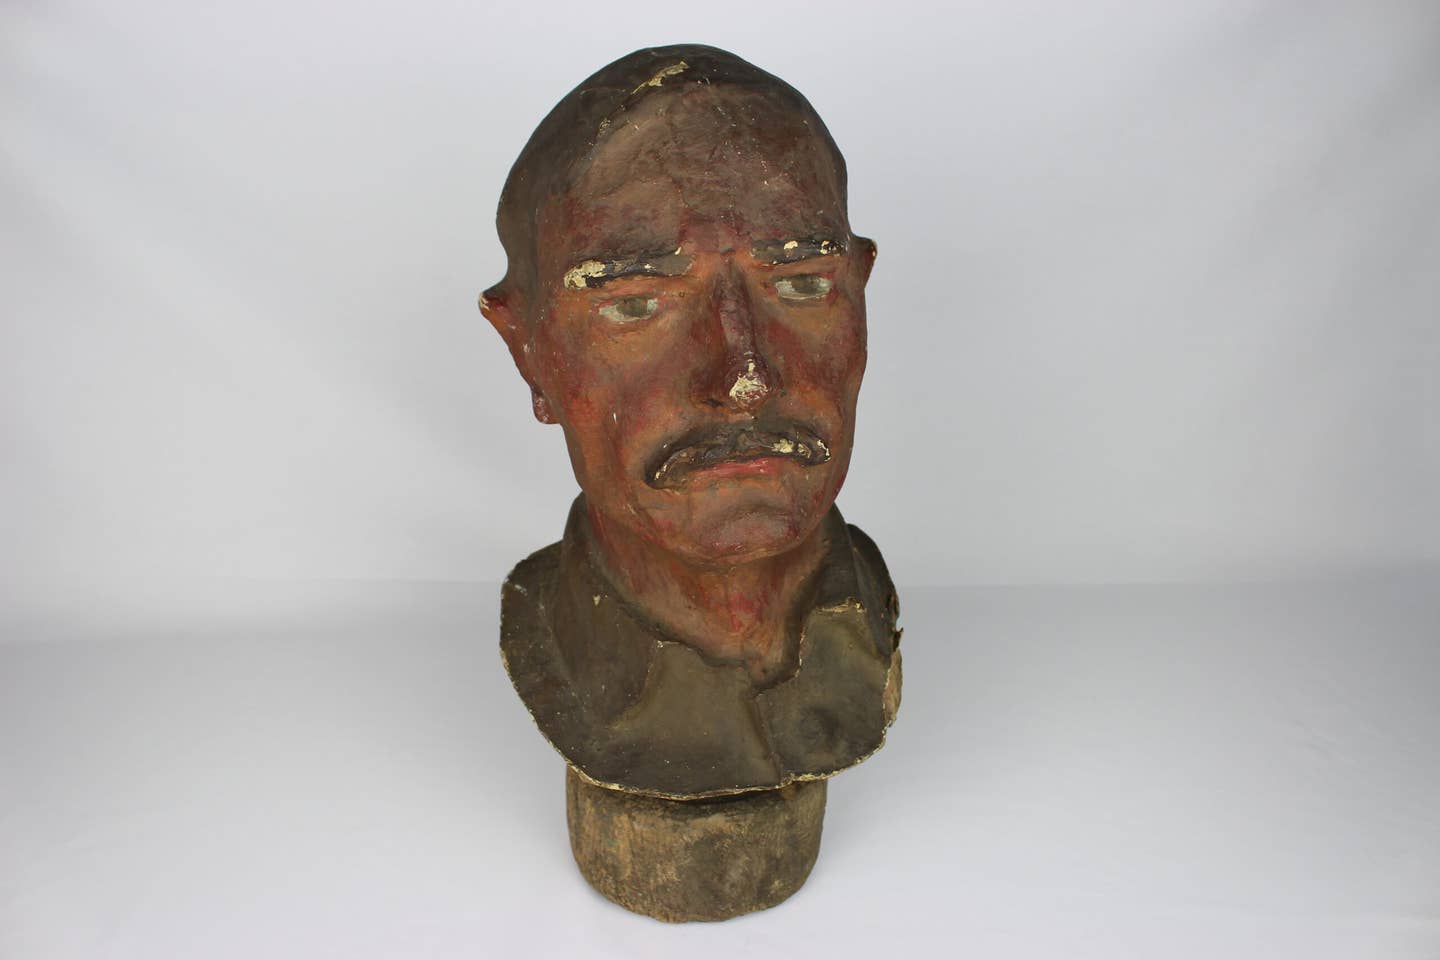 A World War One papier-mâché sniper decoy in the shape of a human head, apparently a British officer. <em>Courtesy of York Museums Trust</em><br>